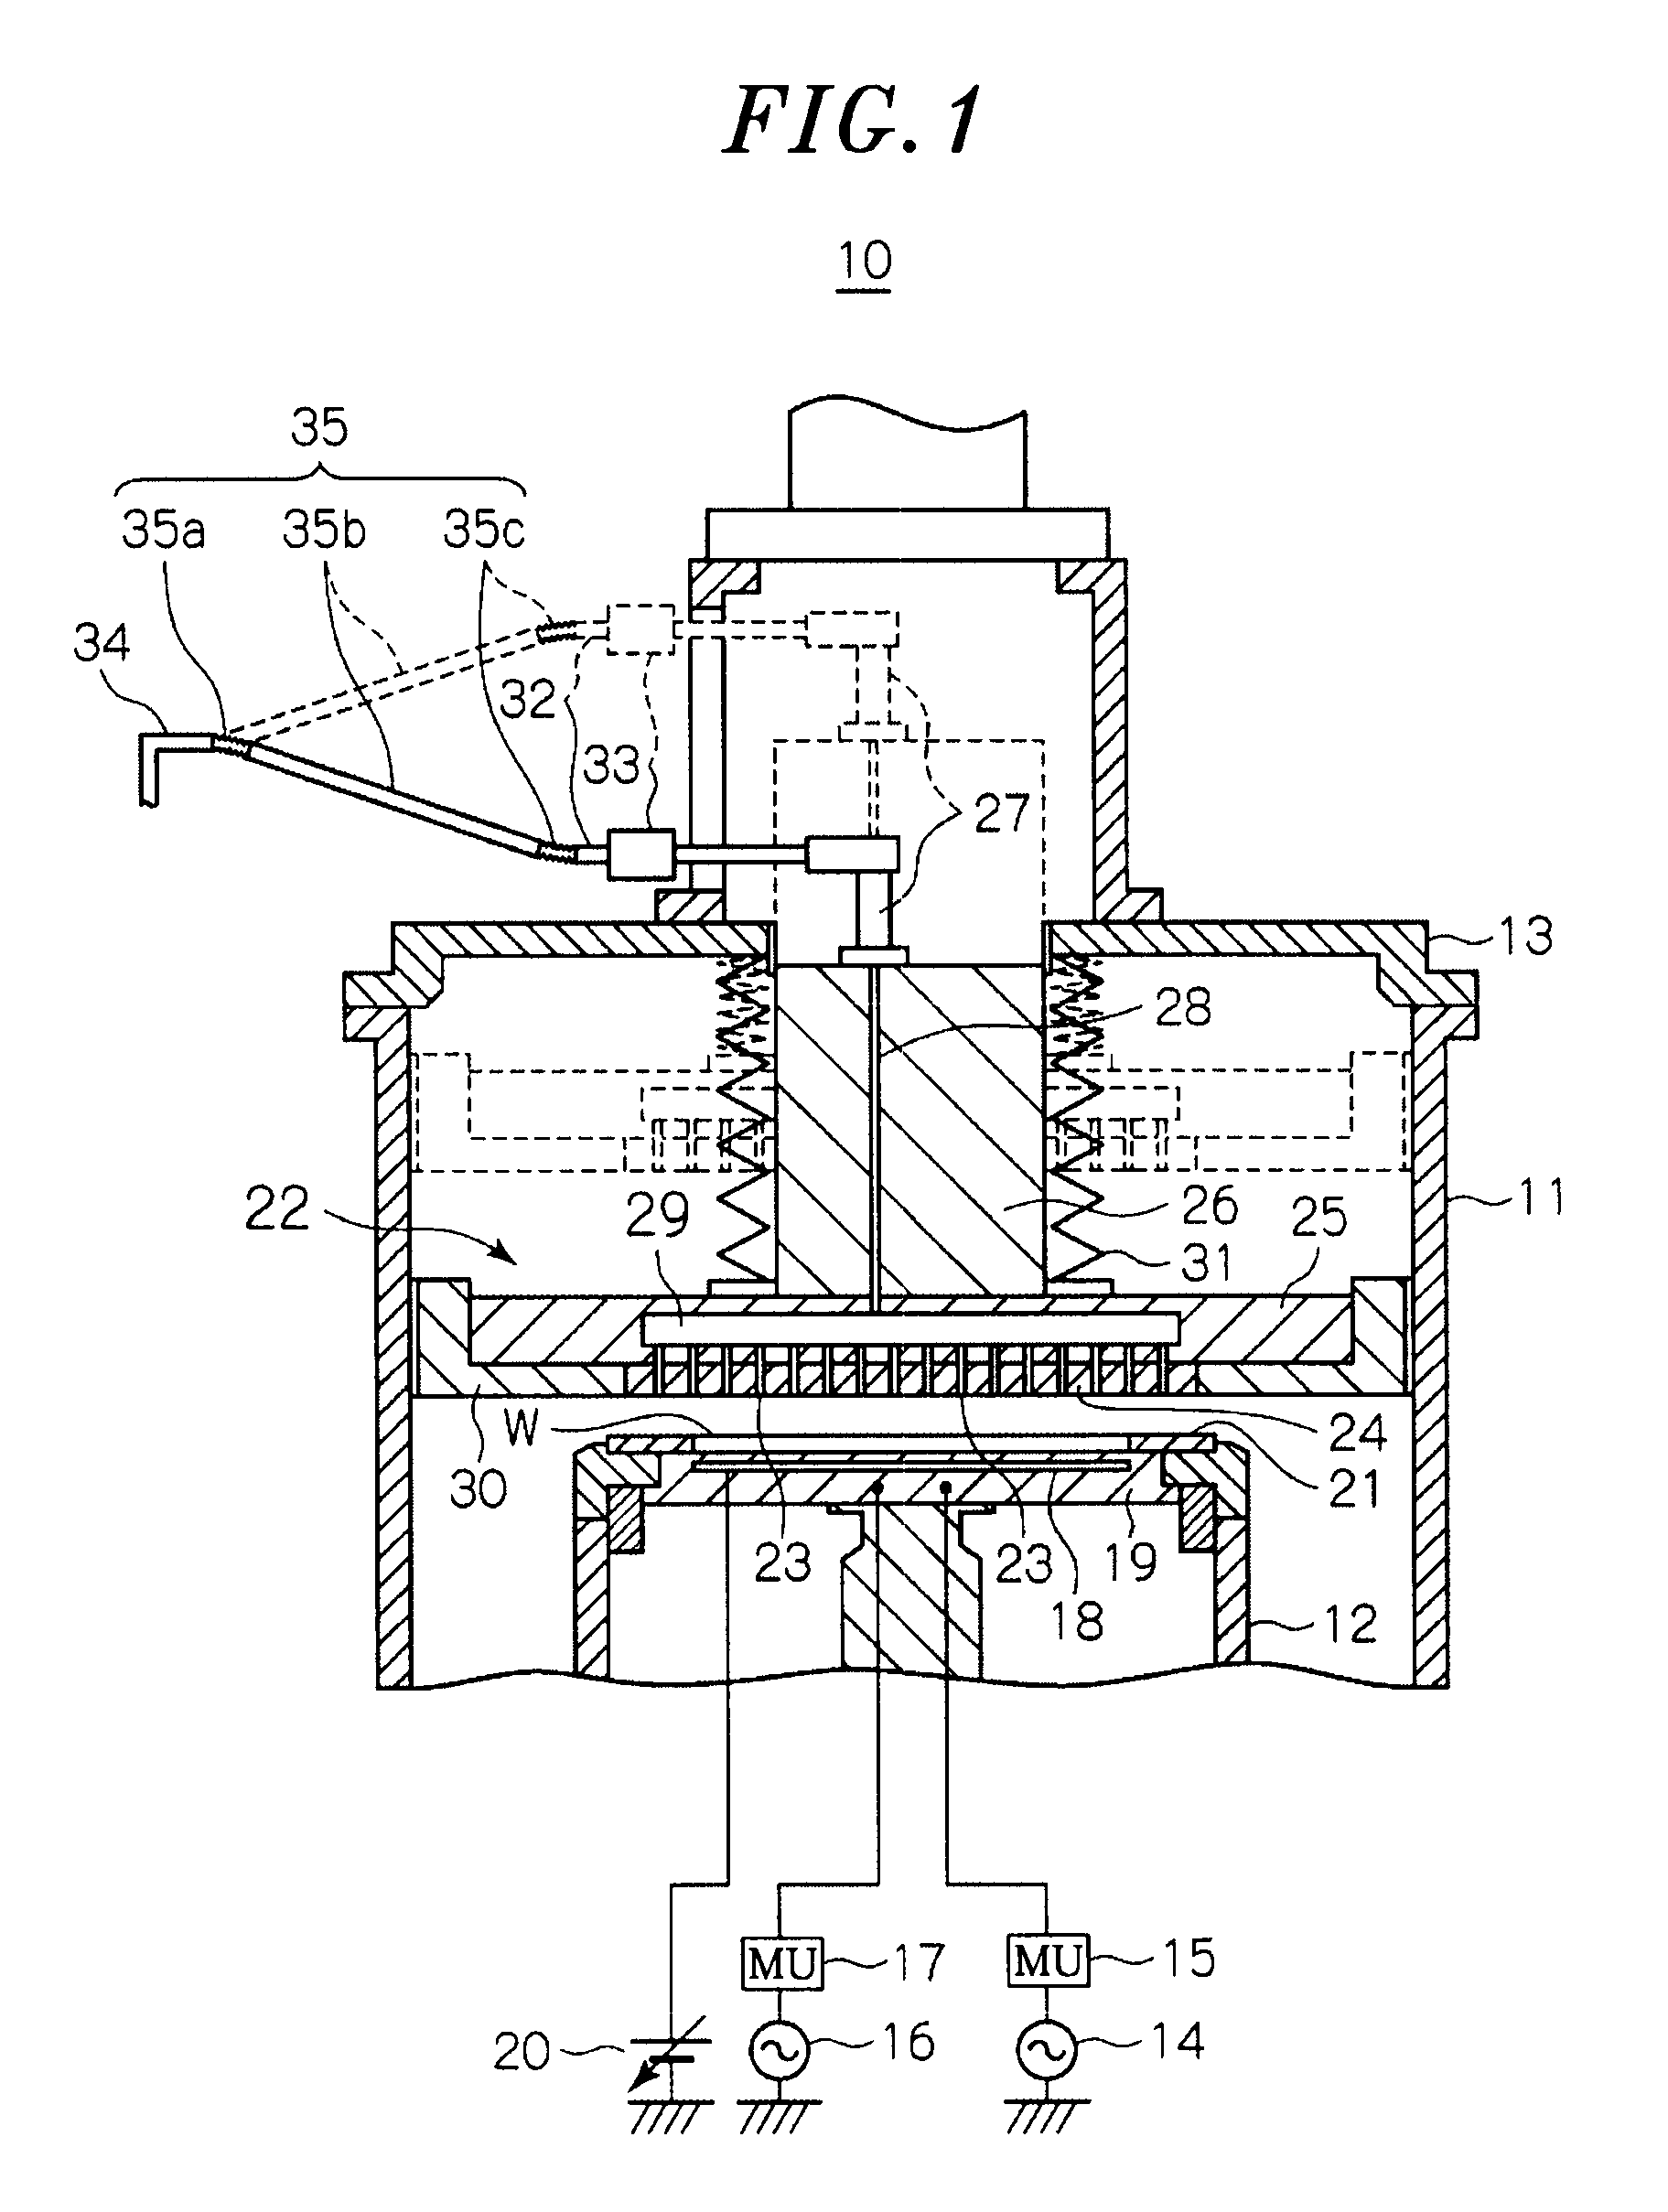 Movable gas introduction structure and substrate processing apparatus having same